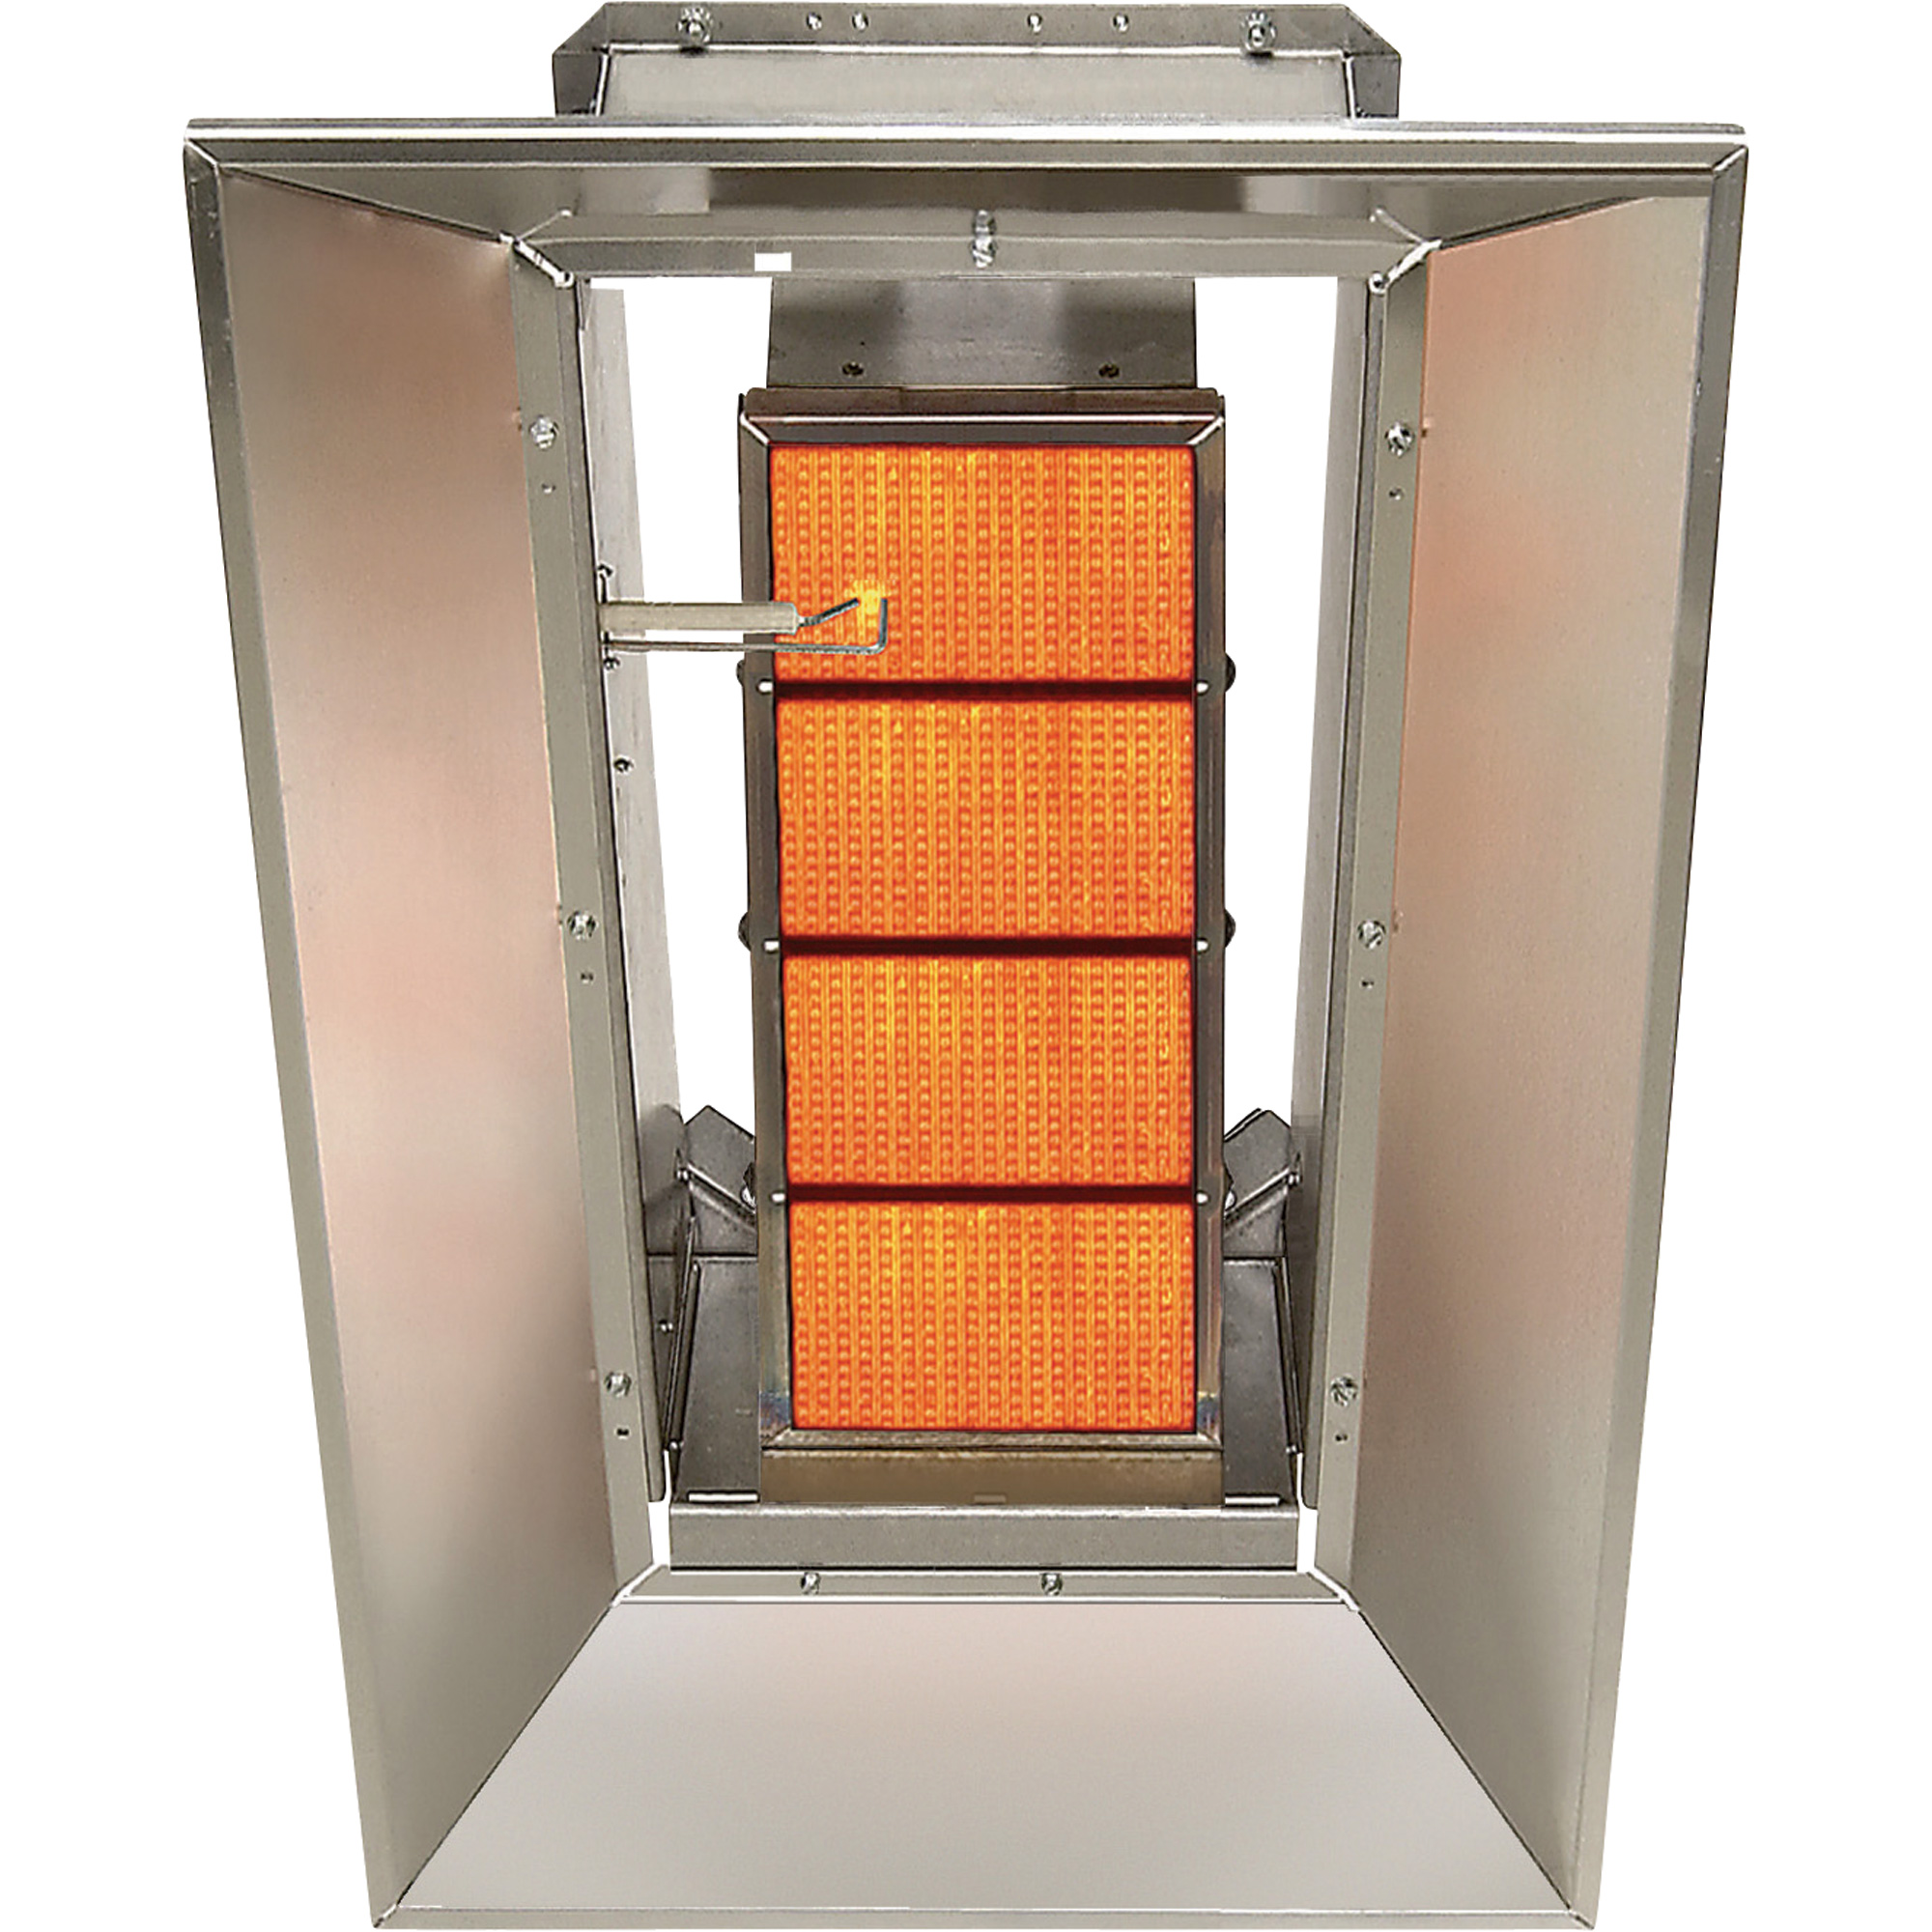 SunStar Heating Products Infrared Ceramic Heater